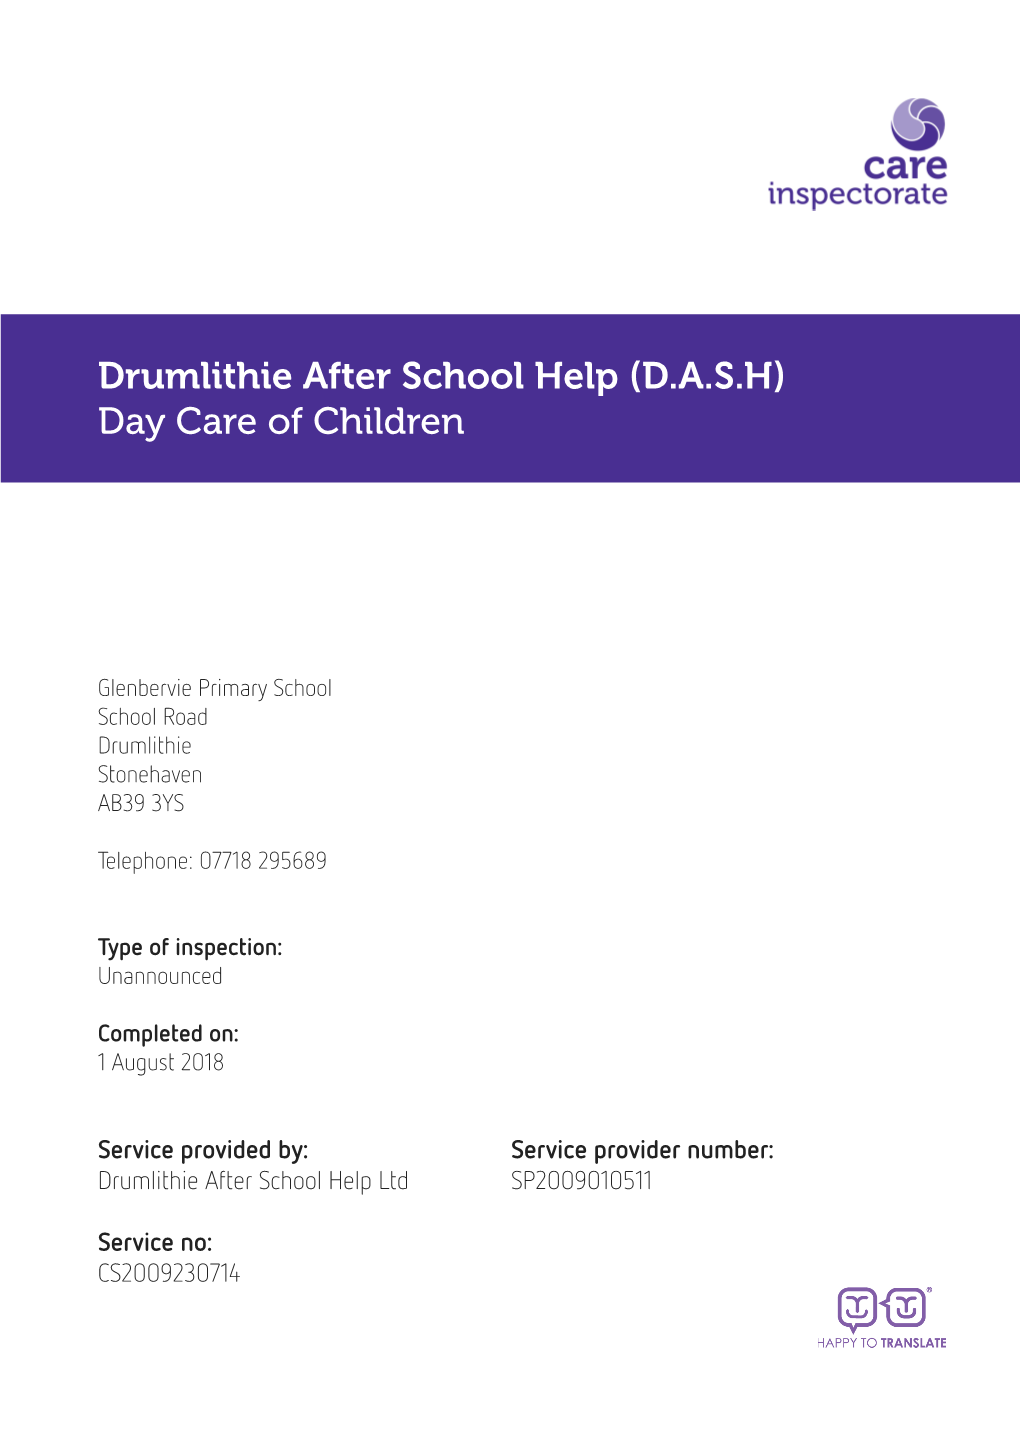 Drumlithie After School Help (D.A.S.H) Day Care of Children